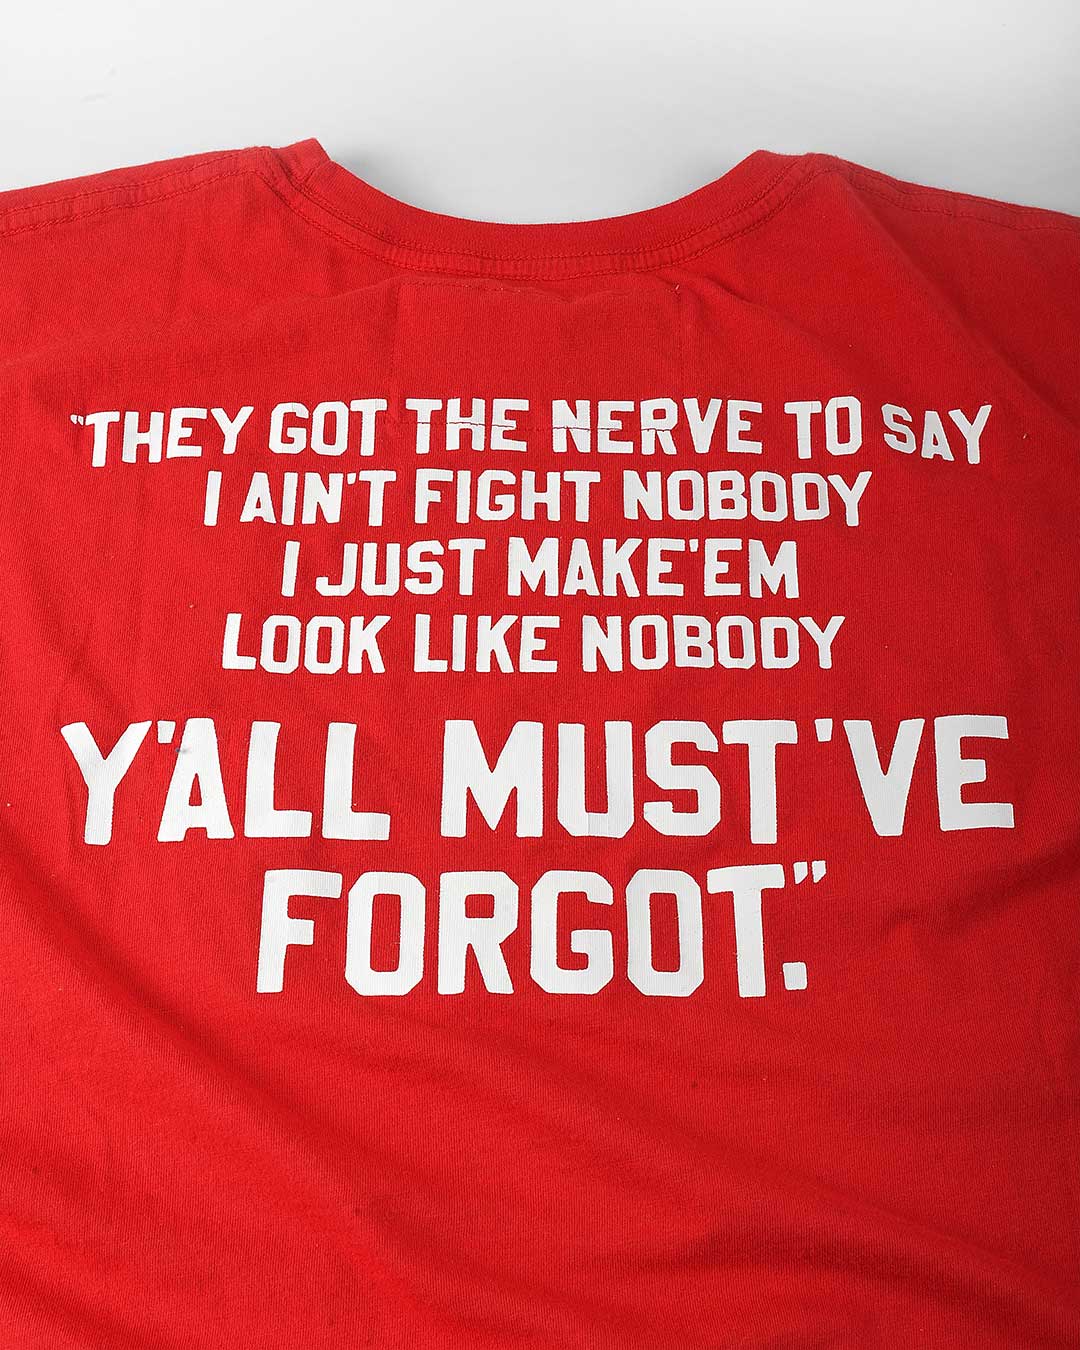 Roy Jones Jr. H.O.F. Red Tee - Roots of Fight Canada